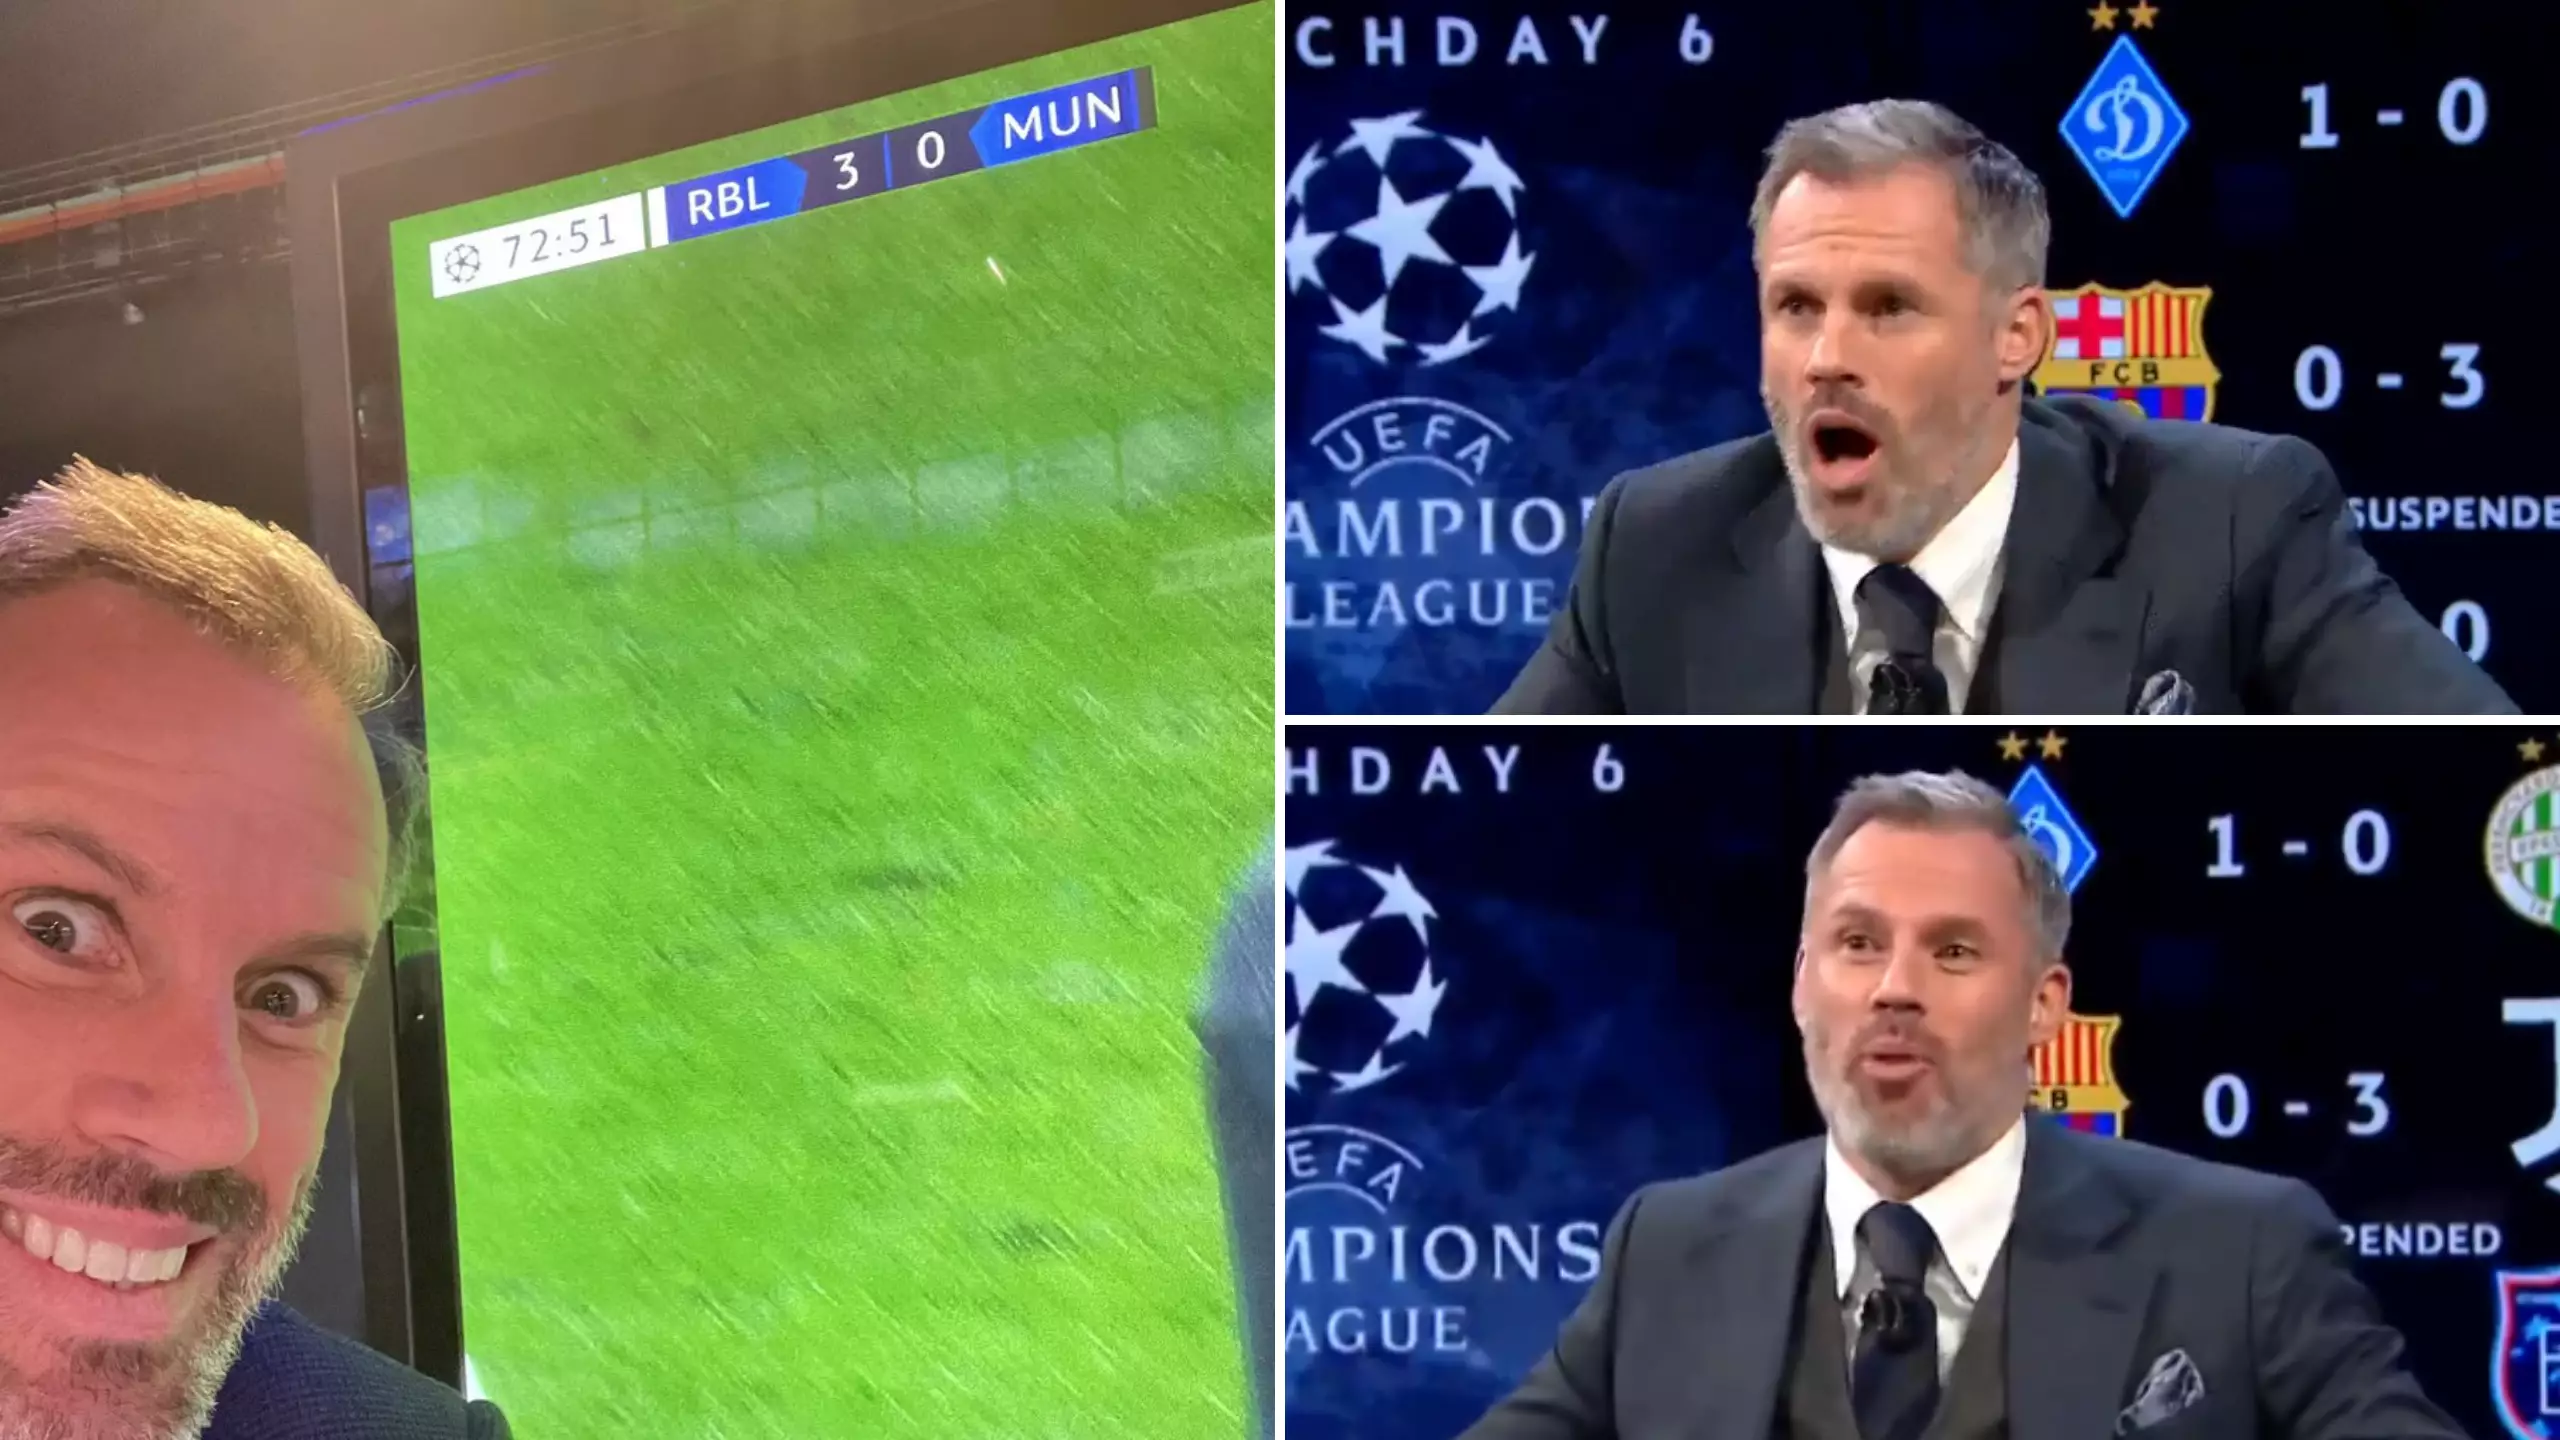 Jamie Carragher Was On Top Form While Covering Manchester United's Champions League Exit